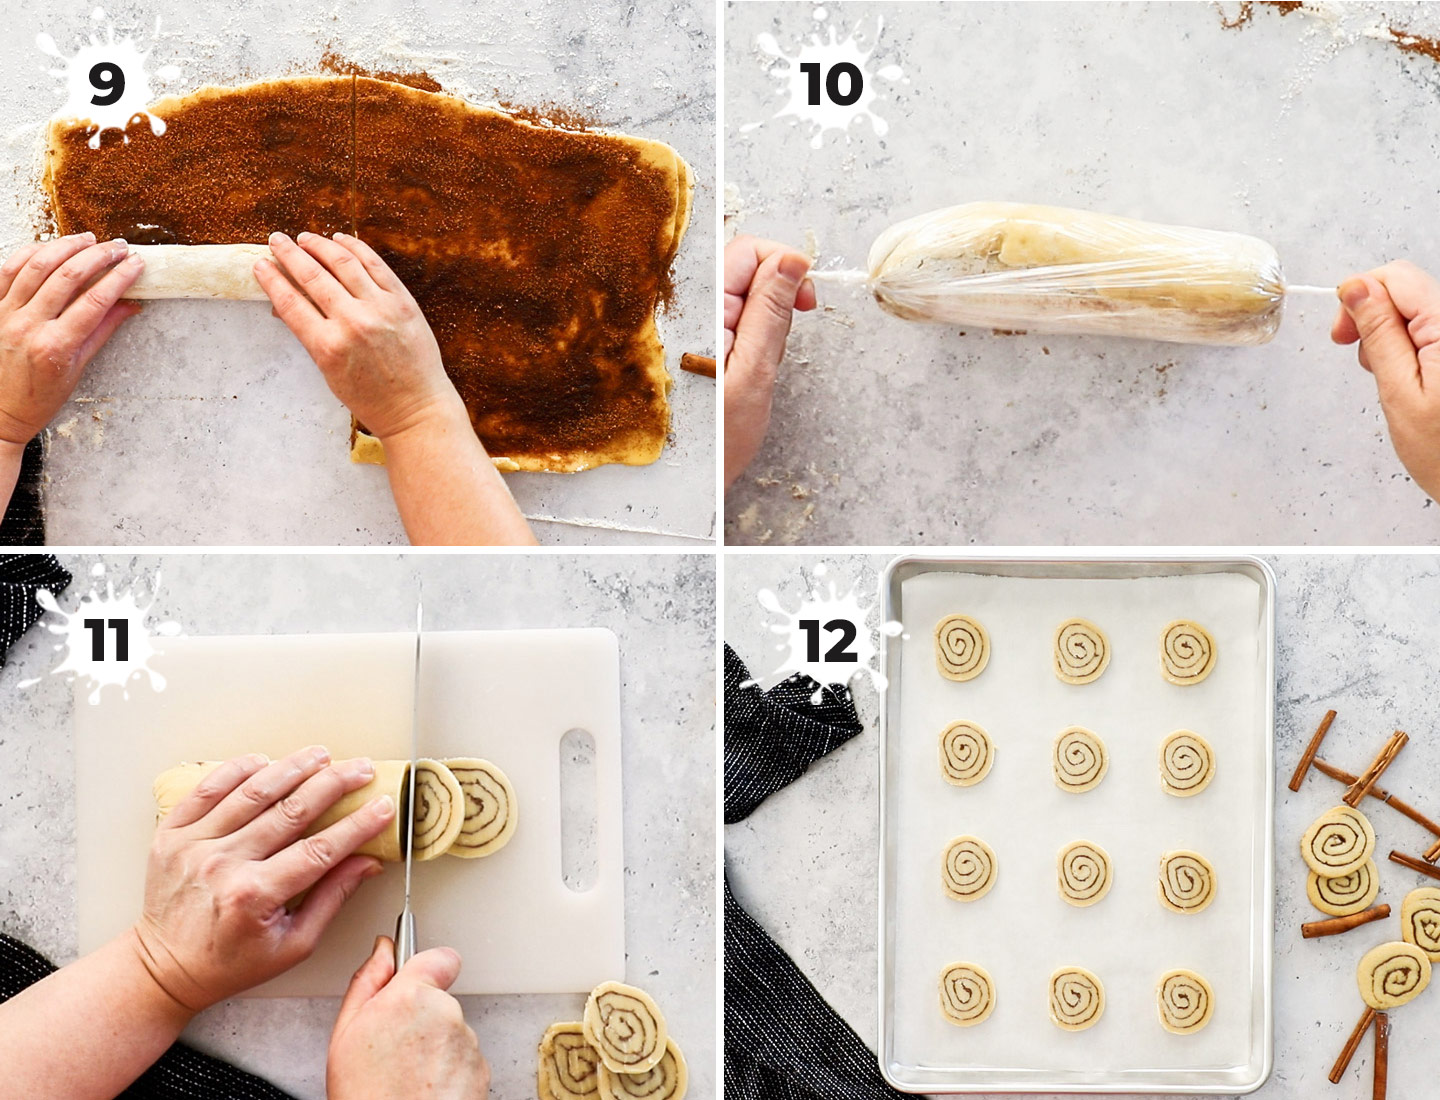 A collage showing how to roll the cookies and prepare them for baking.